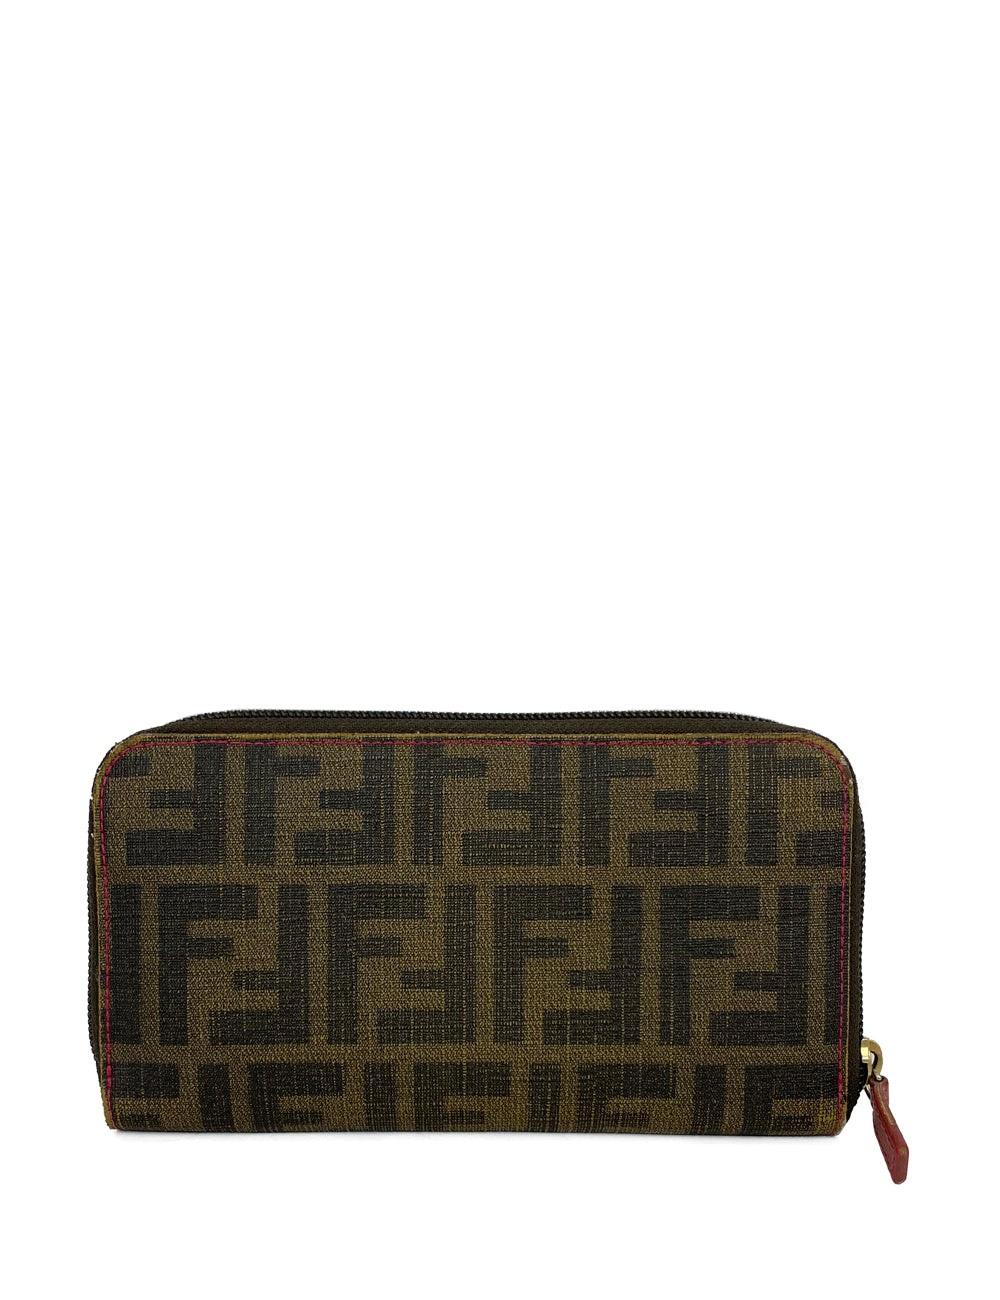 Fendi Zucca Print Tobacco Leather Wallet. Four slide pockets, one zipper pocket, and 12 card pockets on the inside. 

Additional information:
Material: leather 
Measurements: 19 W x 2 D x 10 H cm
Overall condition: fair
Interior condition: signs of